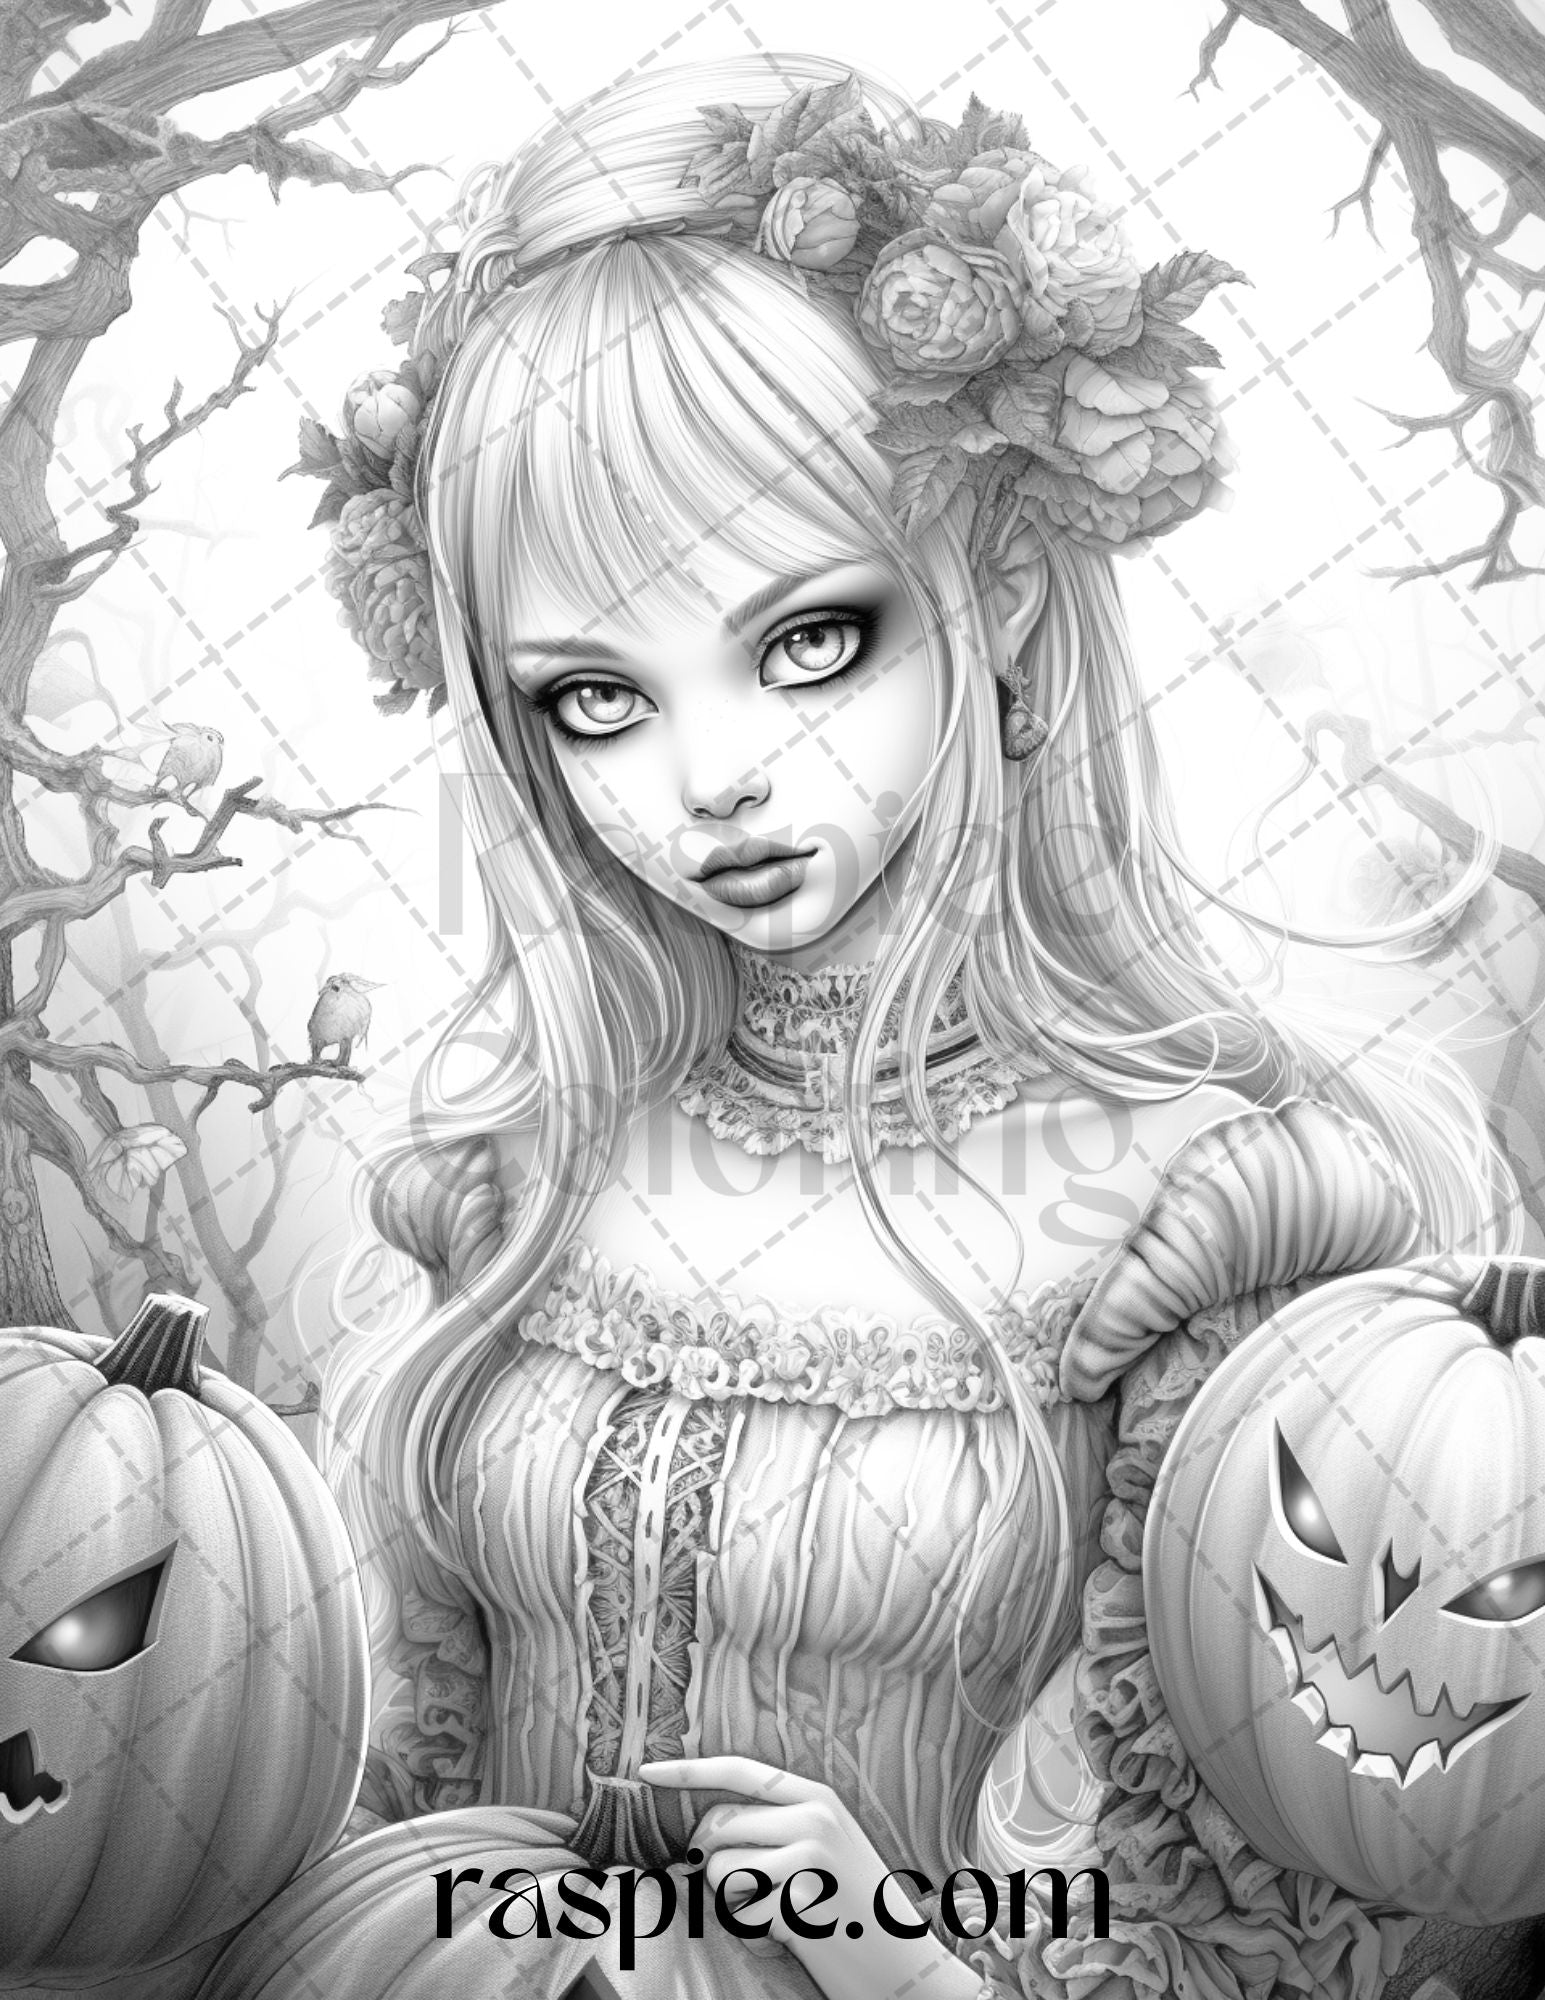 Printable Halloween Raspiee for Adults, Coloring PDF 55 – Grayscale Pages Girls Coloring